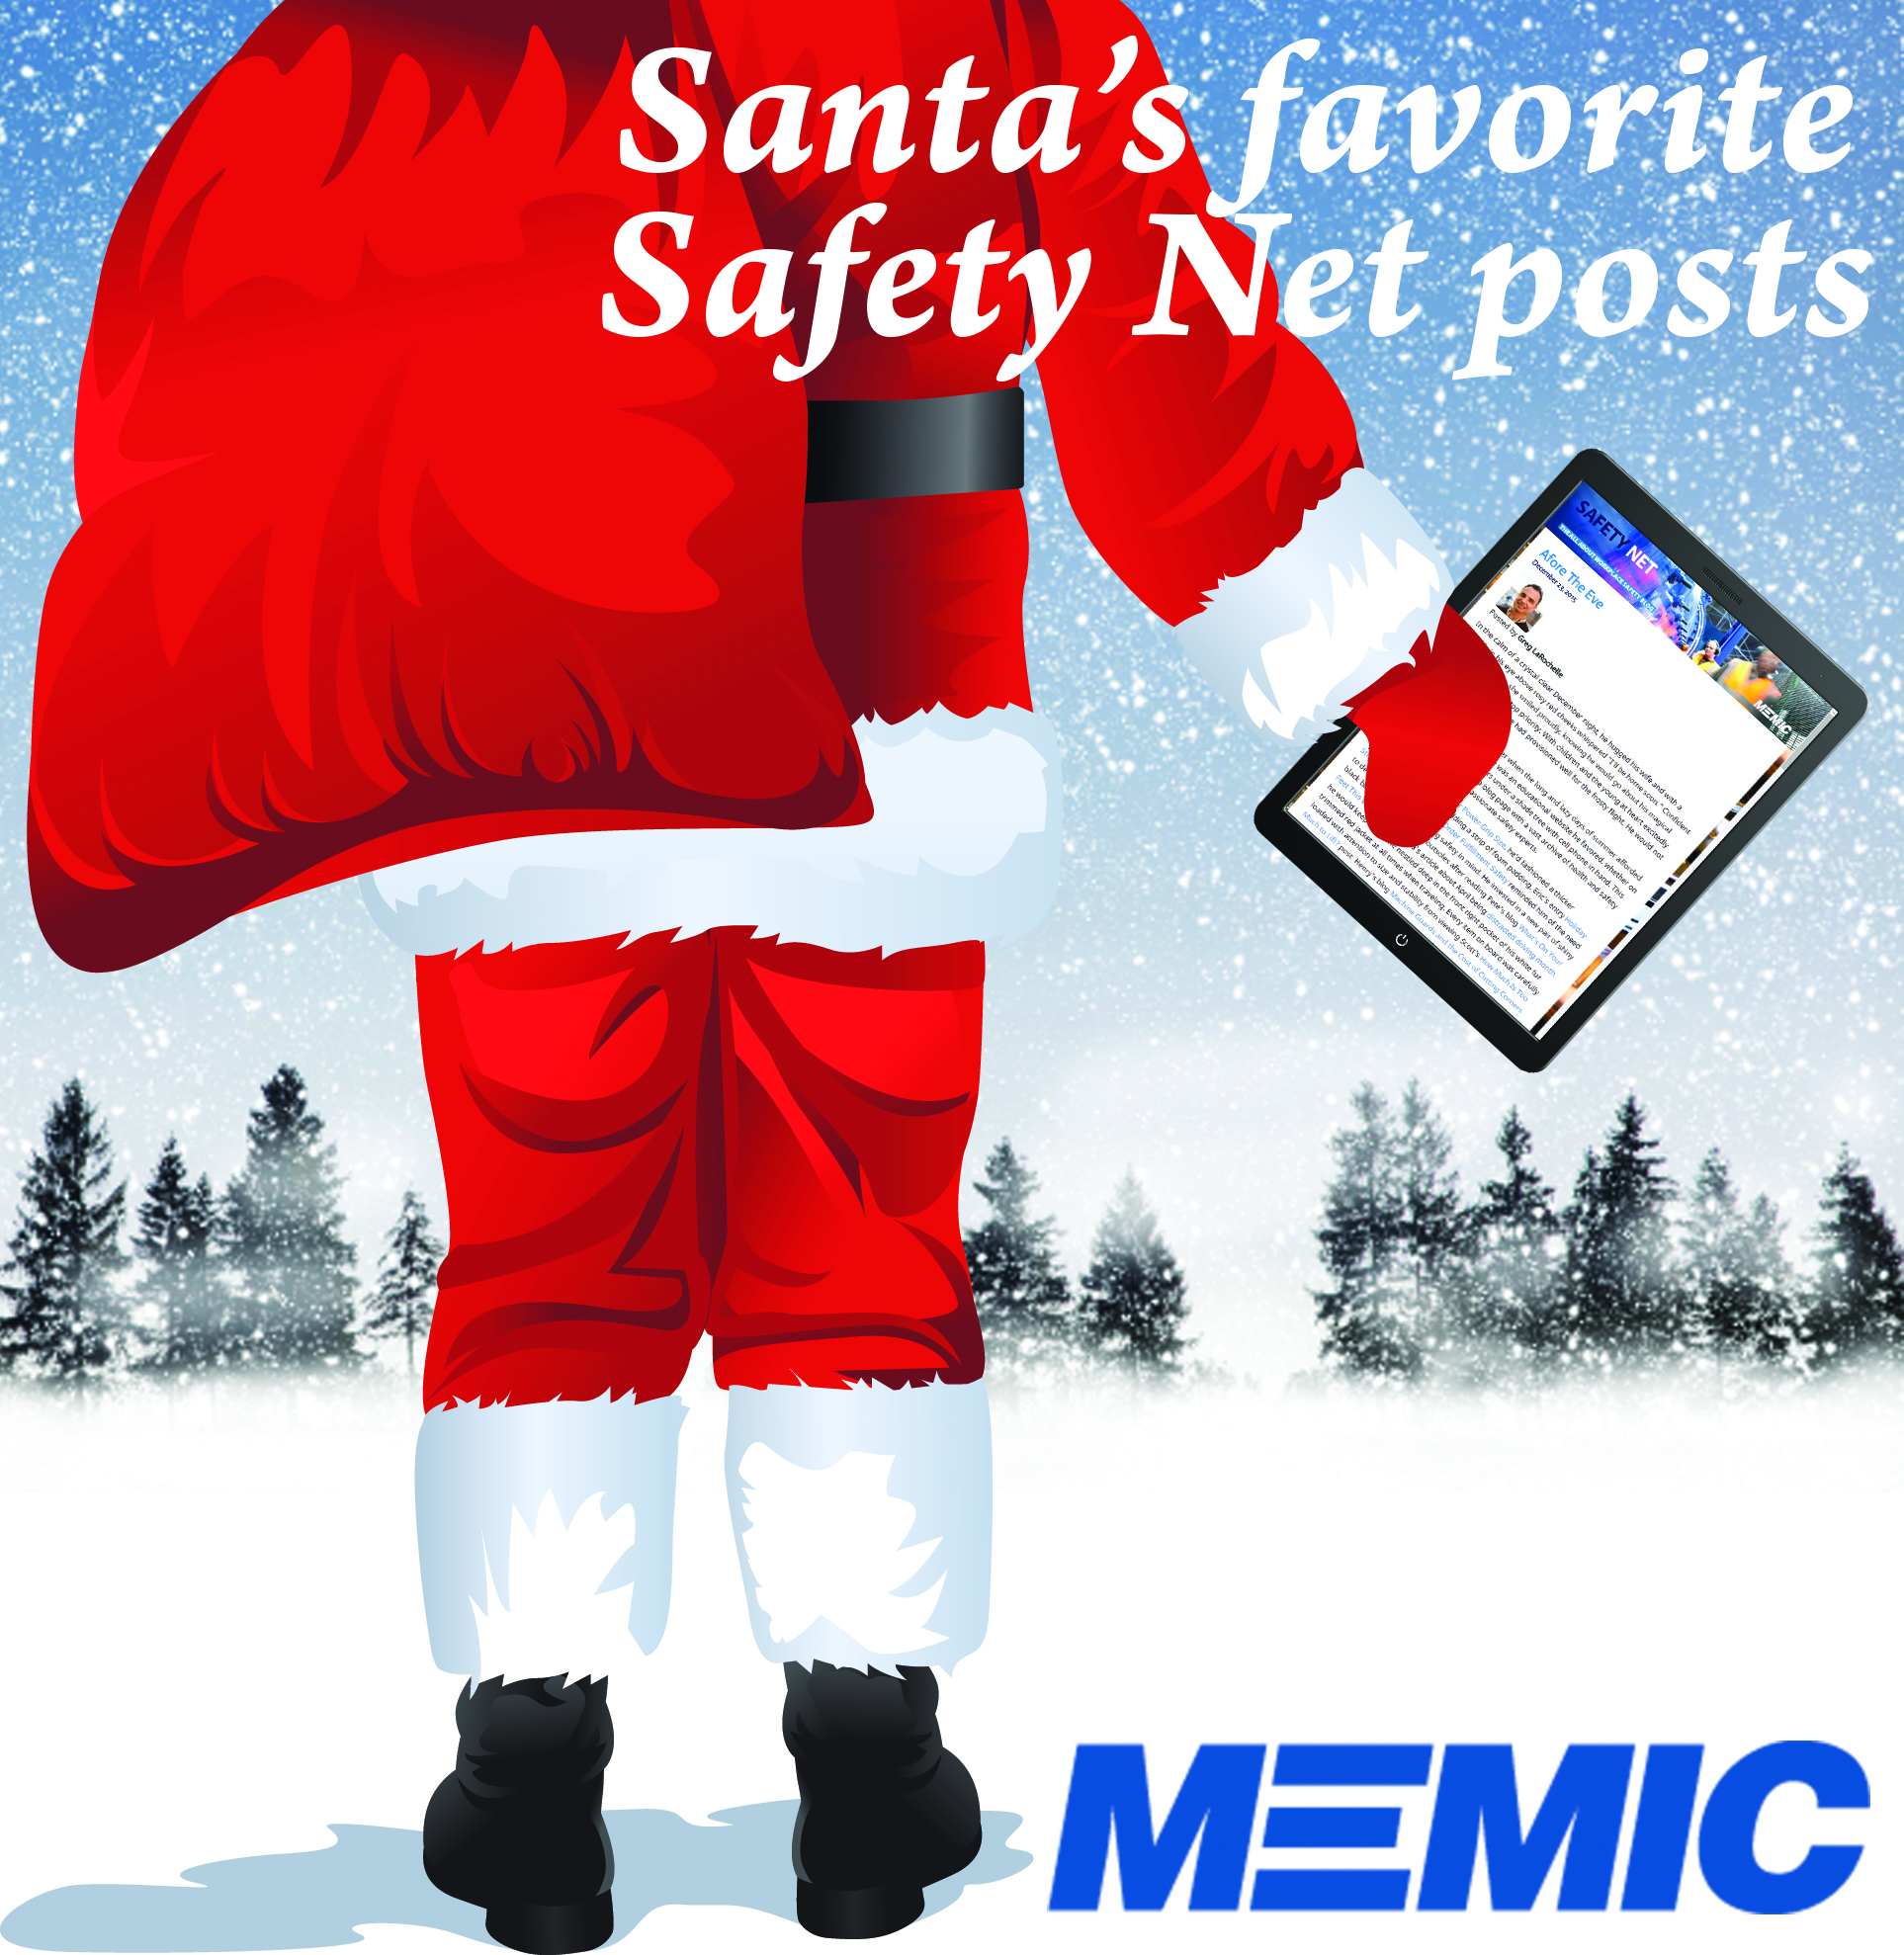 Santa Claus carrying his tablet with the Safety Net blogs.